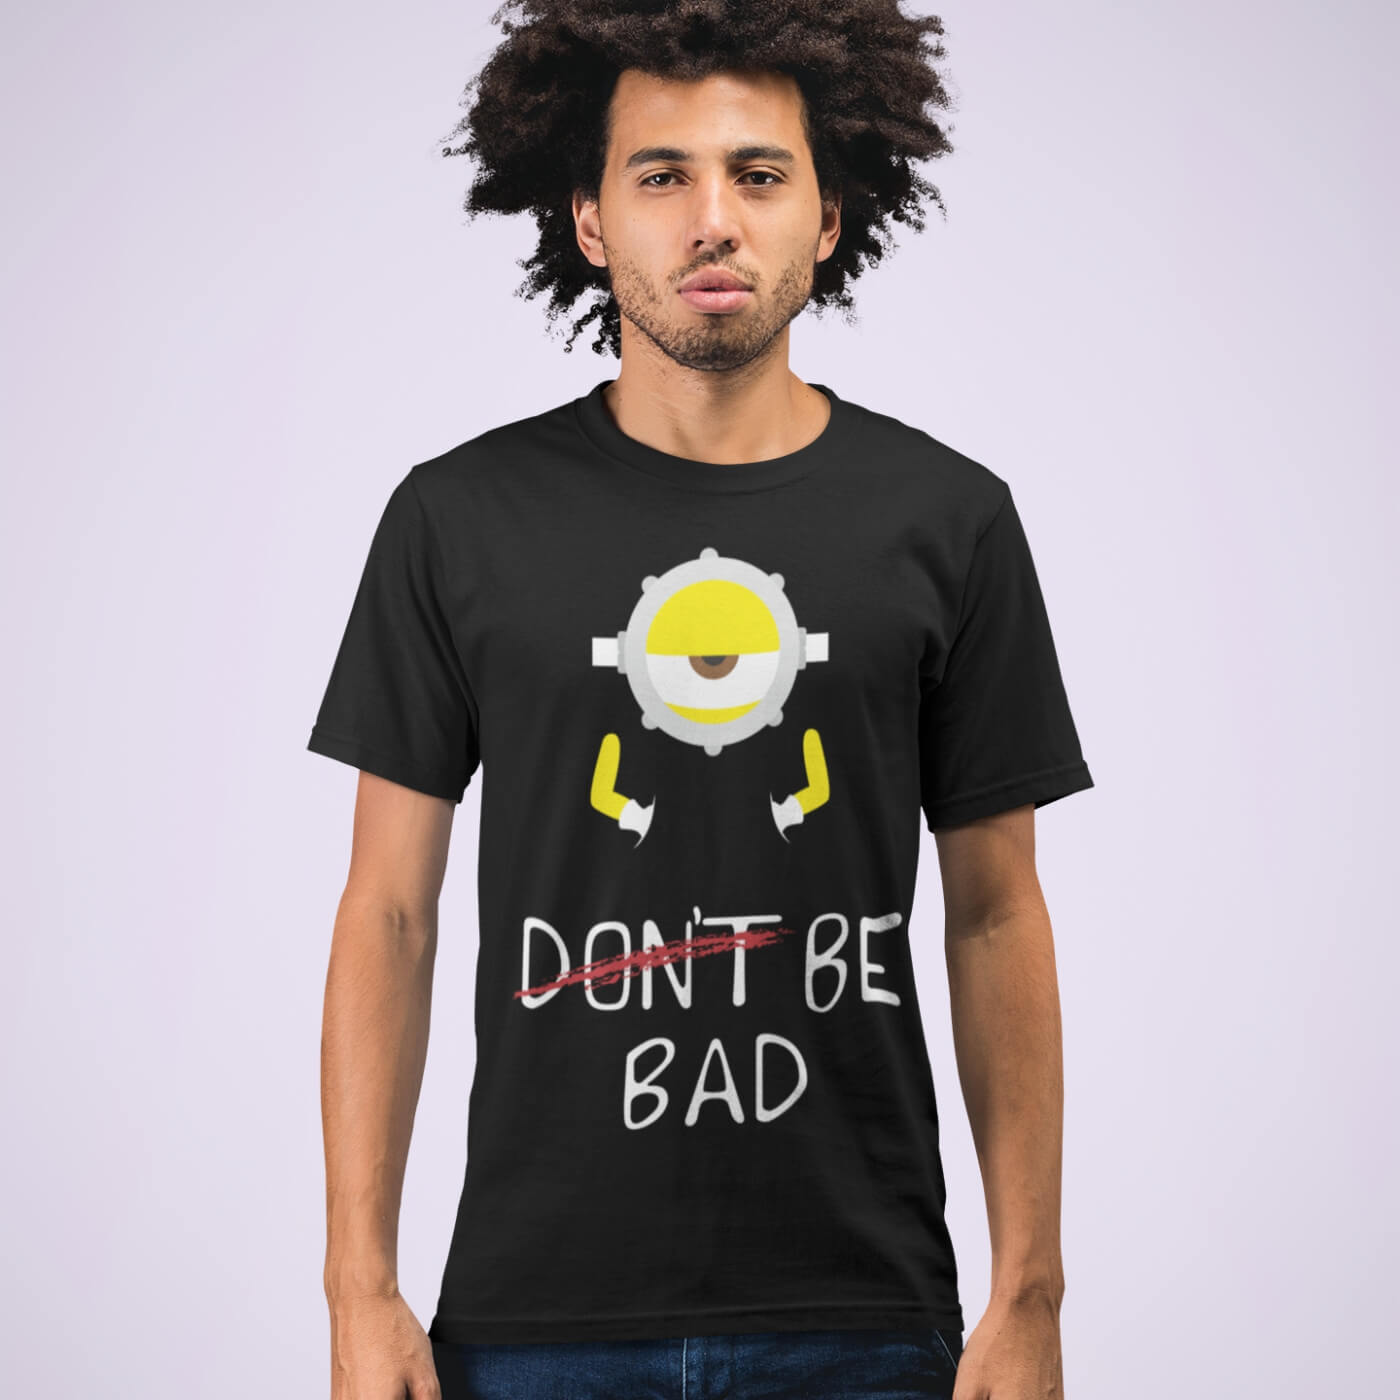 Men T shirts With Prints "Don't Be Perfect For Men.